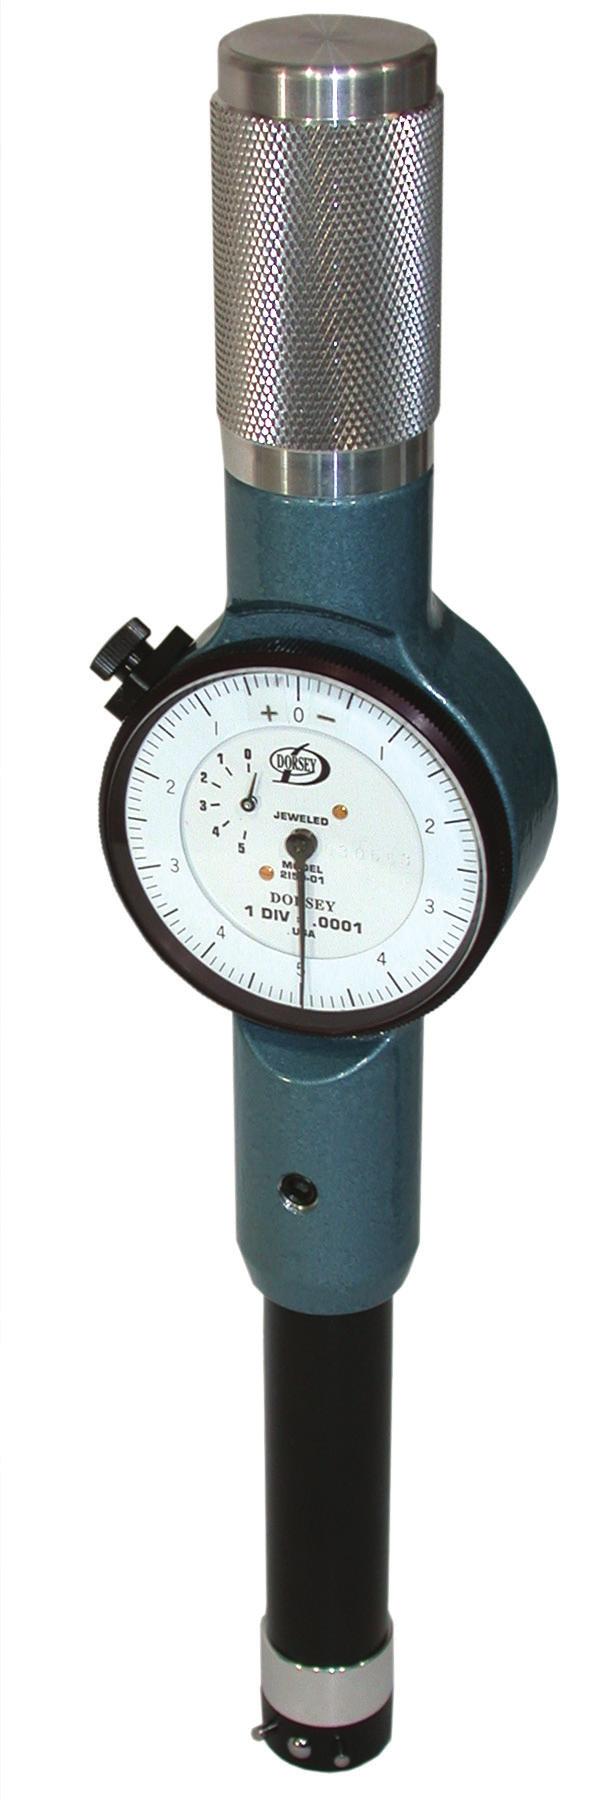 We continue to provide the original Standard Gage Company customers with high quality interchangeable parts.